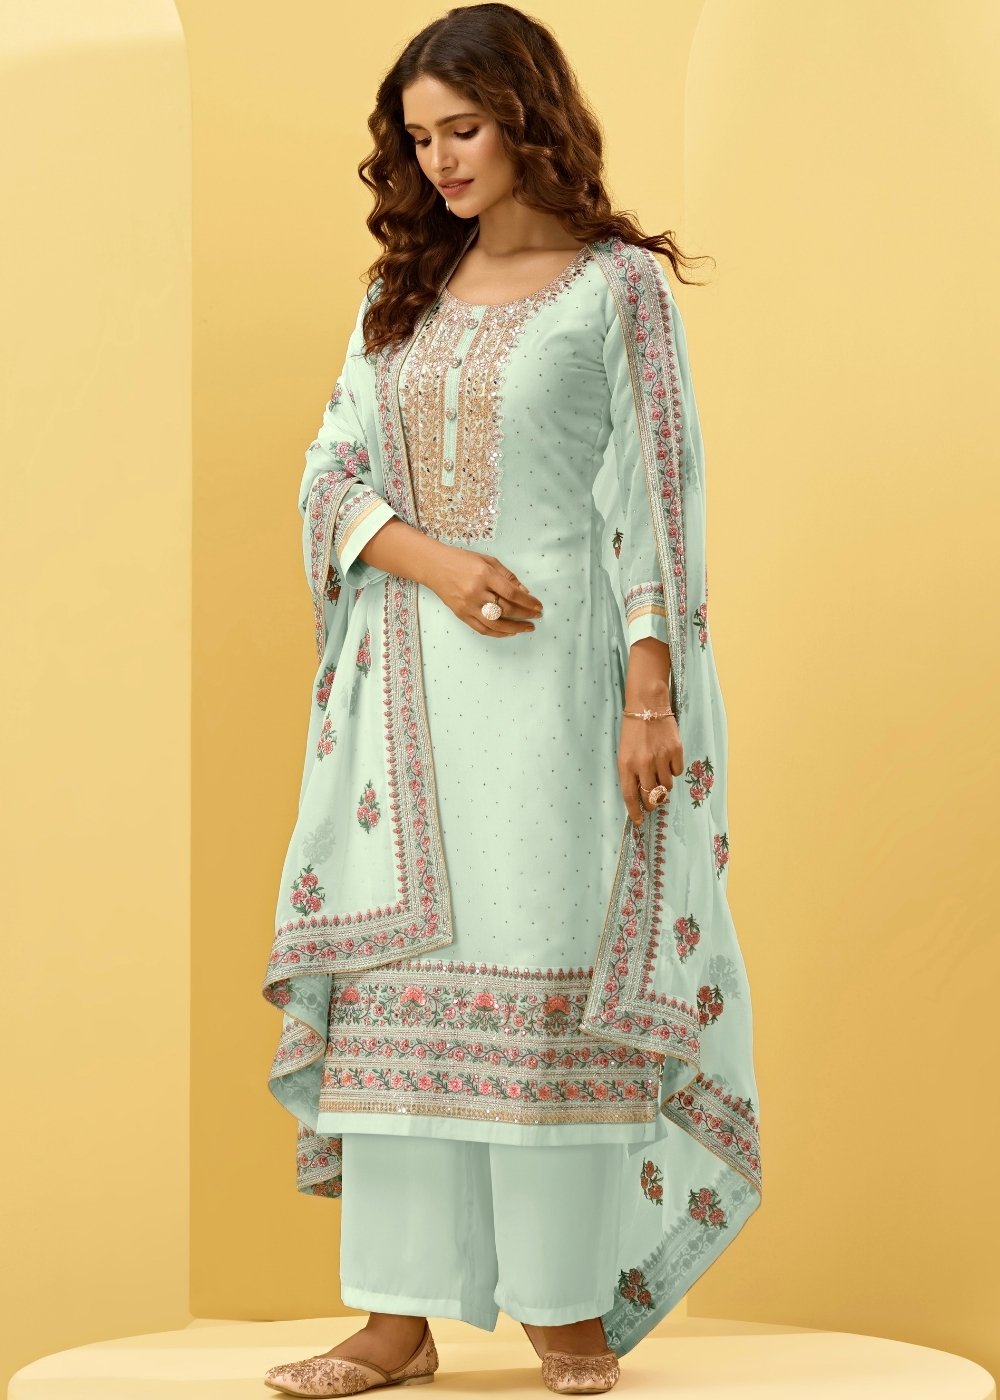 Misty Teal Green Georgette Salwar Suit with Thread, Zari & Cording Embroidery work